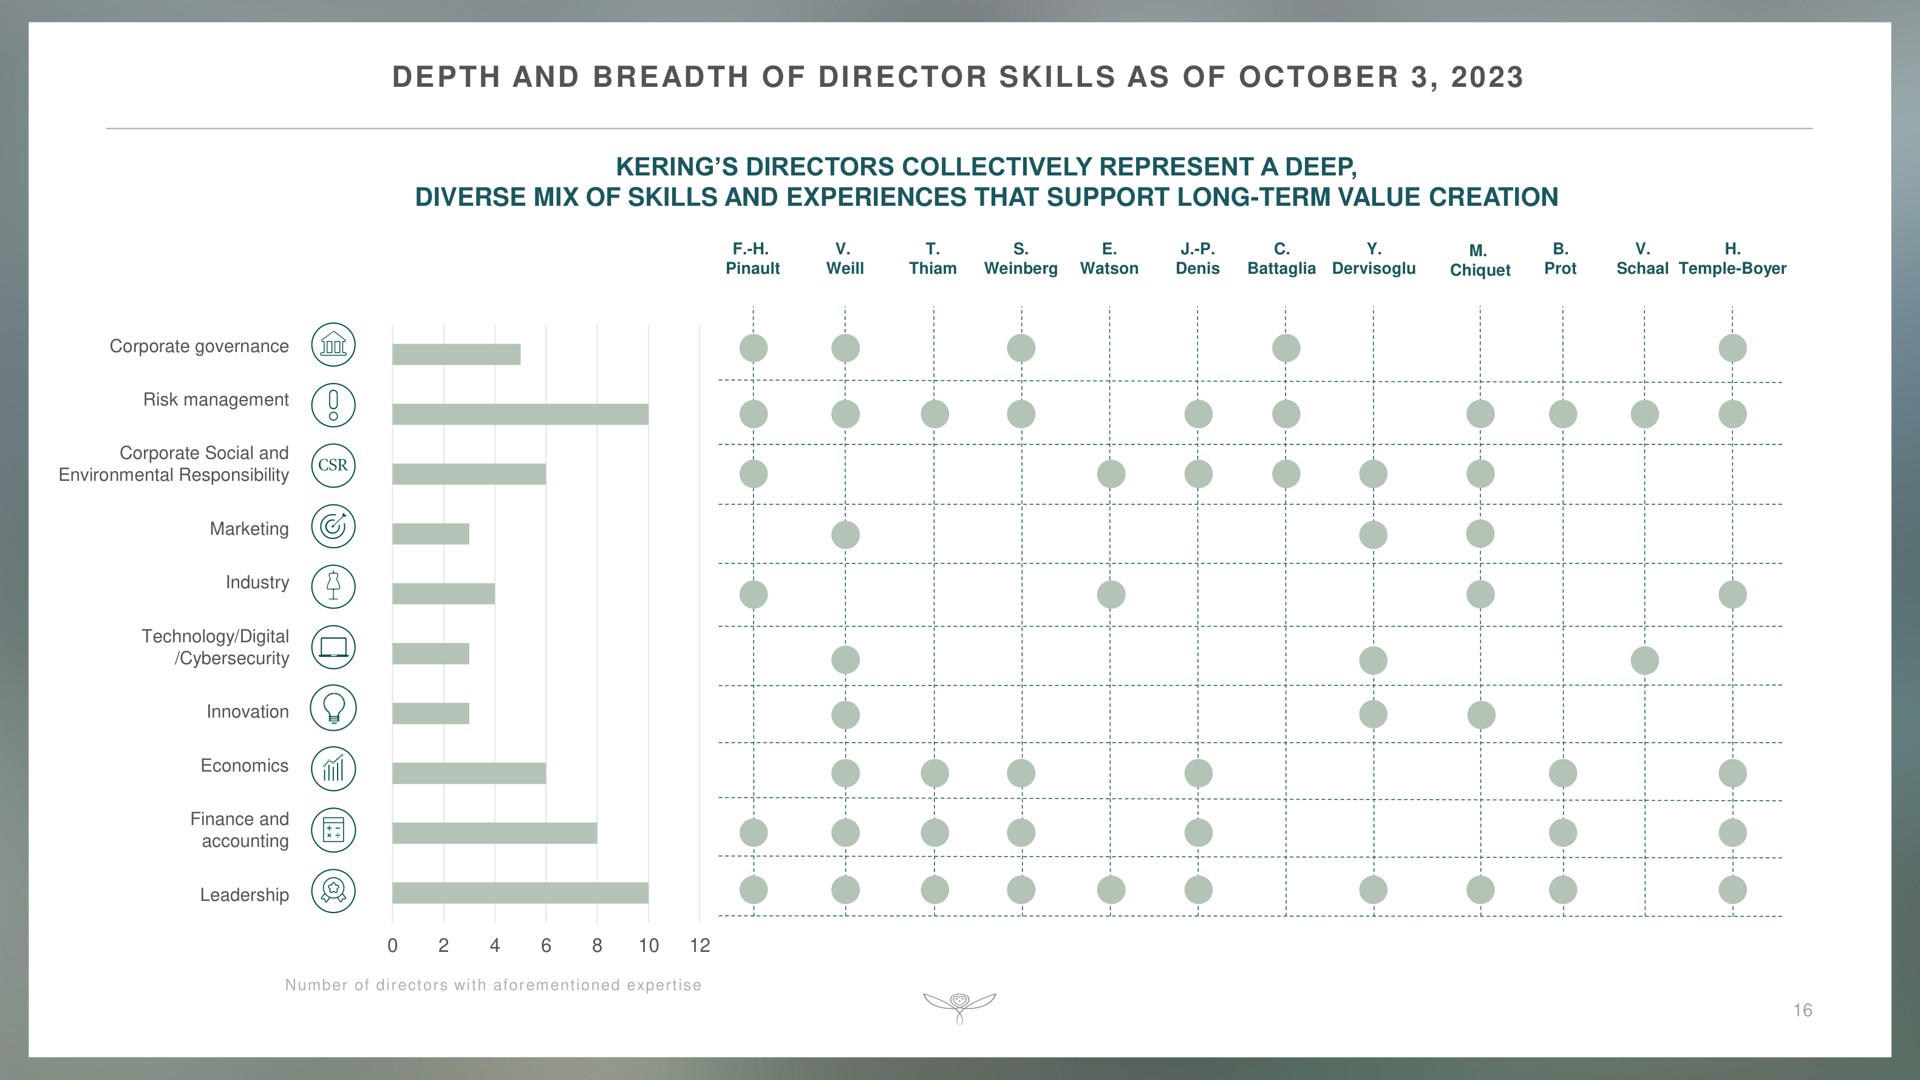 depth and breadth of director skills as of directors collectively represent a deep diverse mix of skills and experiences that support long term value creation | Kering